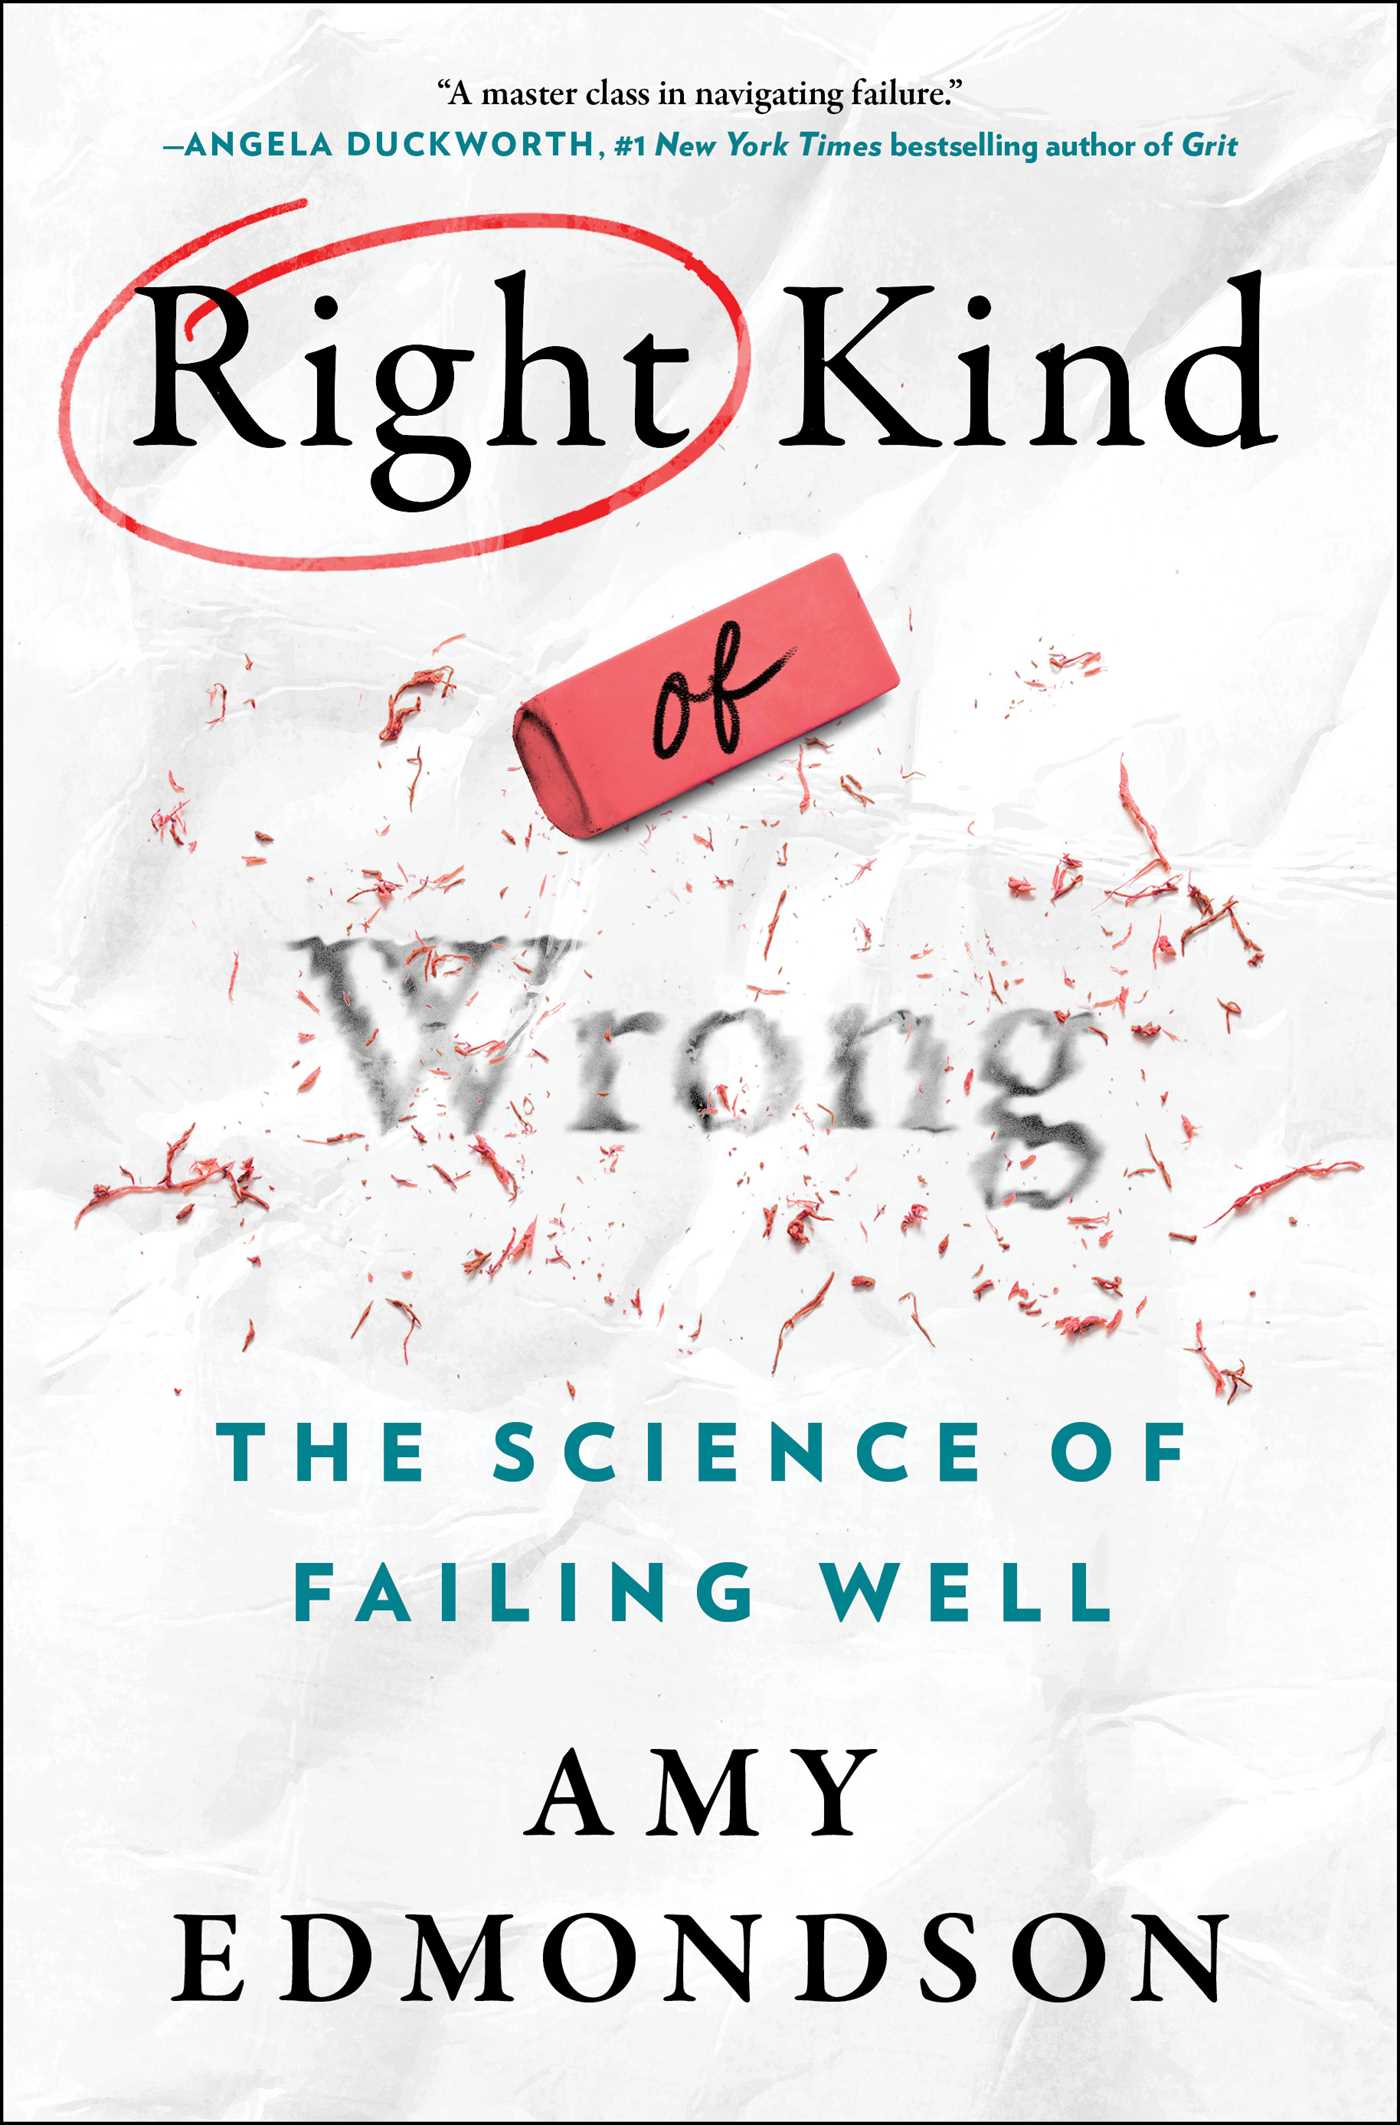 Cover of "Right Kind of Wrong: The Science of Failing Well" by Amy Edmonson